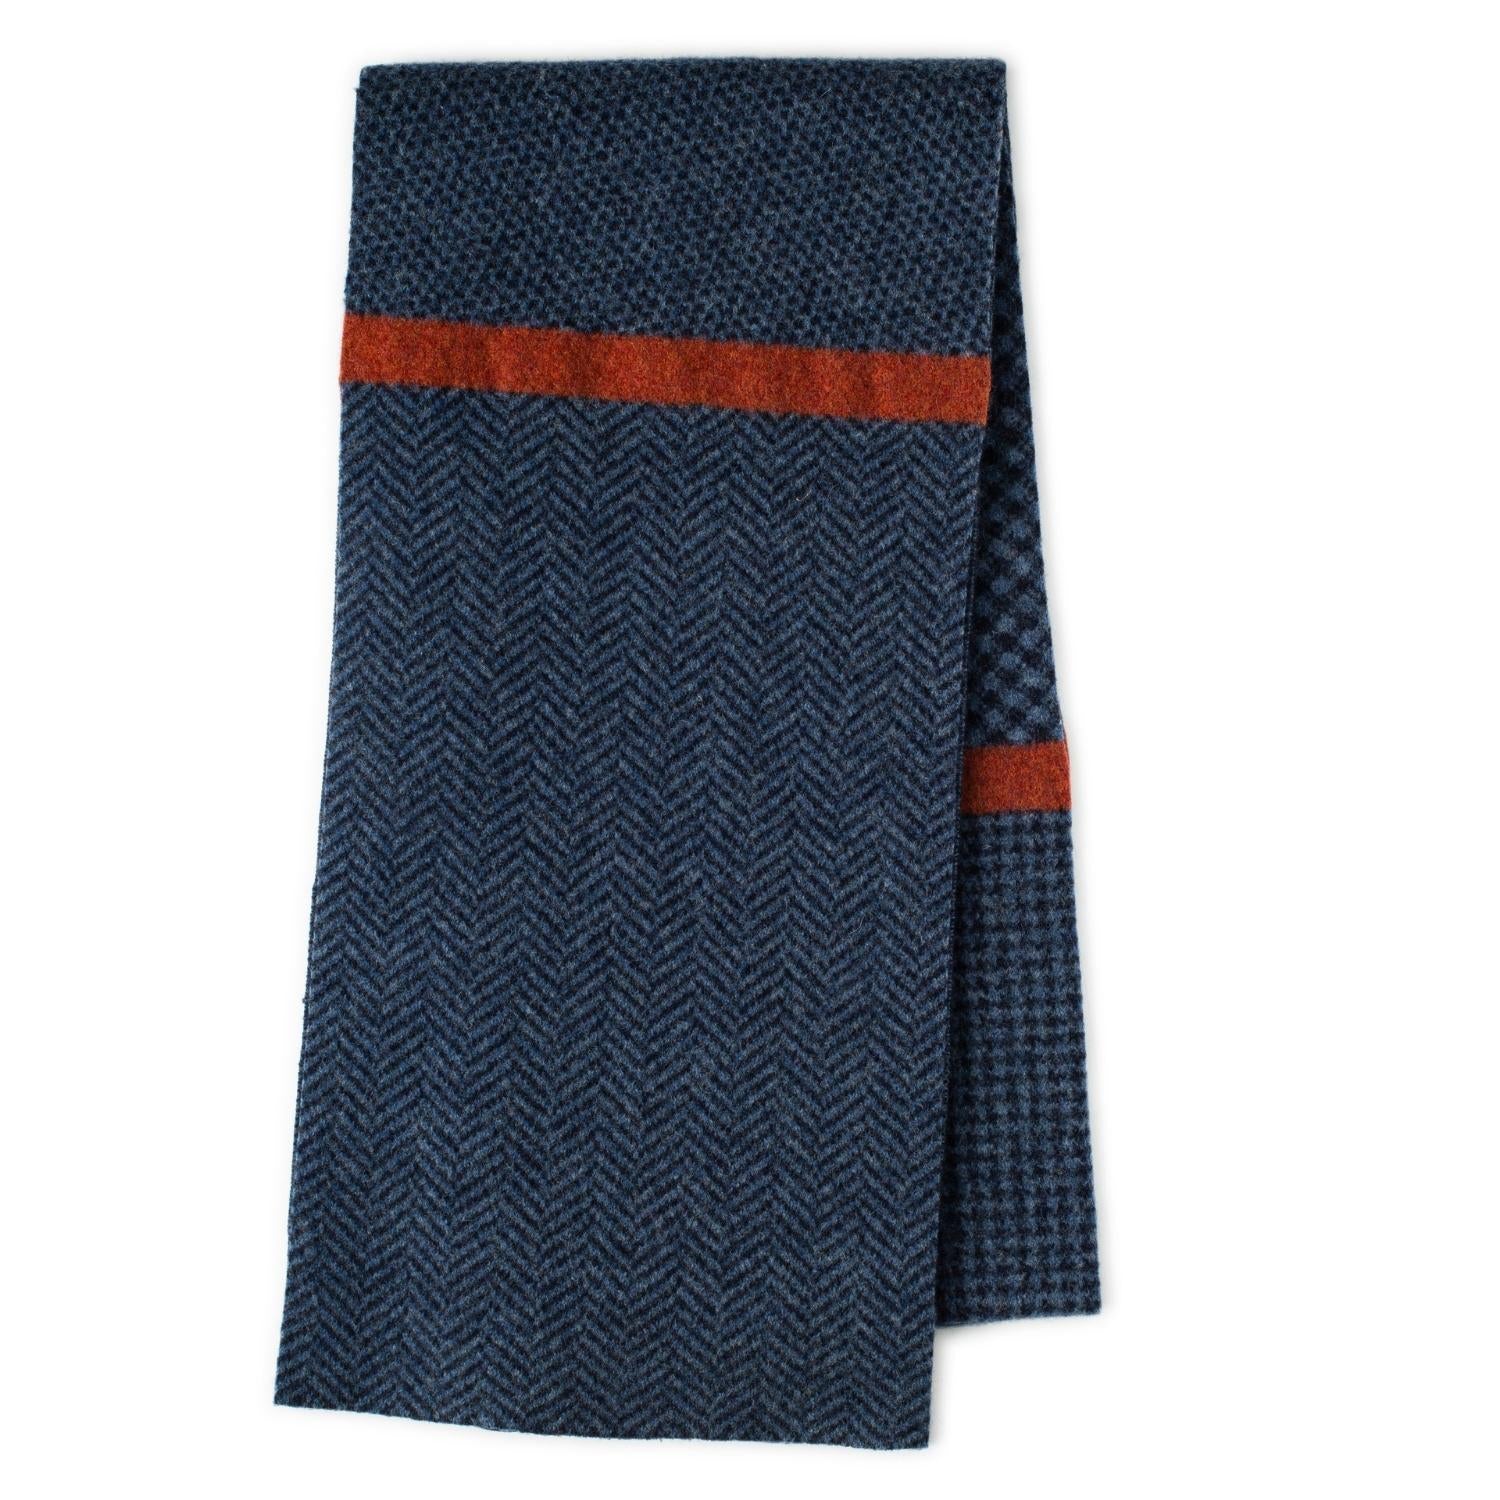 Patterned scarf - herringbone scarf - blue and red 